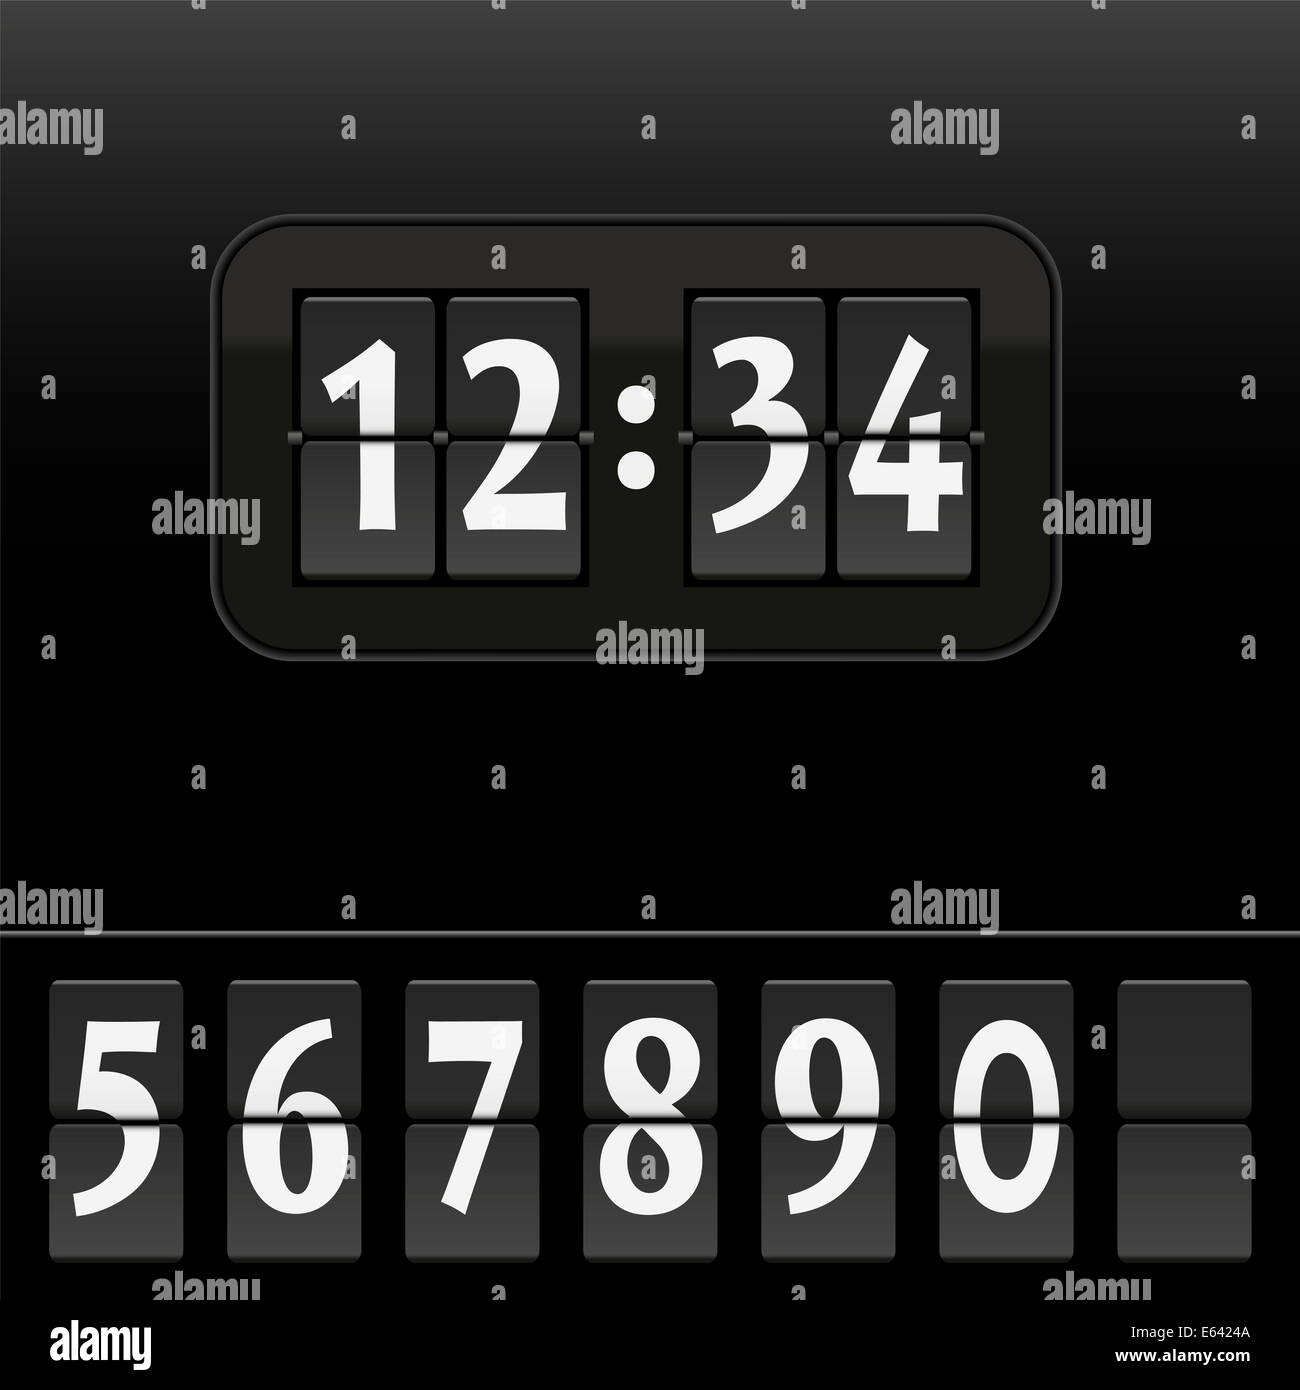 Dial of a digital clock face, where digits and time can individually be changed. Stock Photo